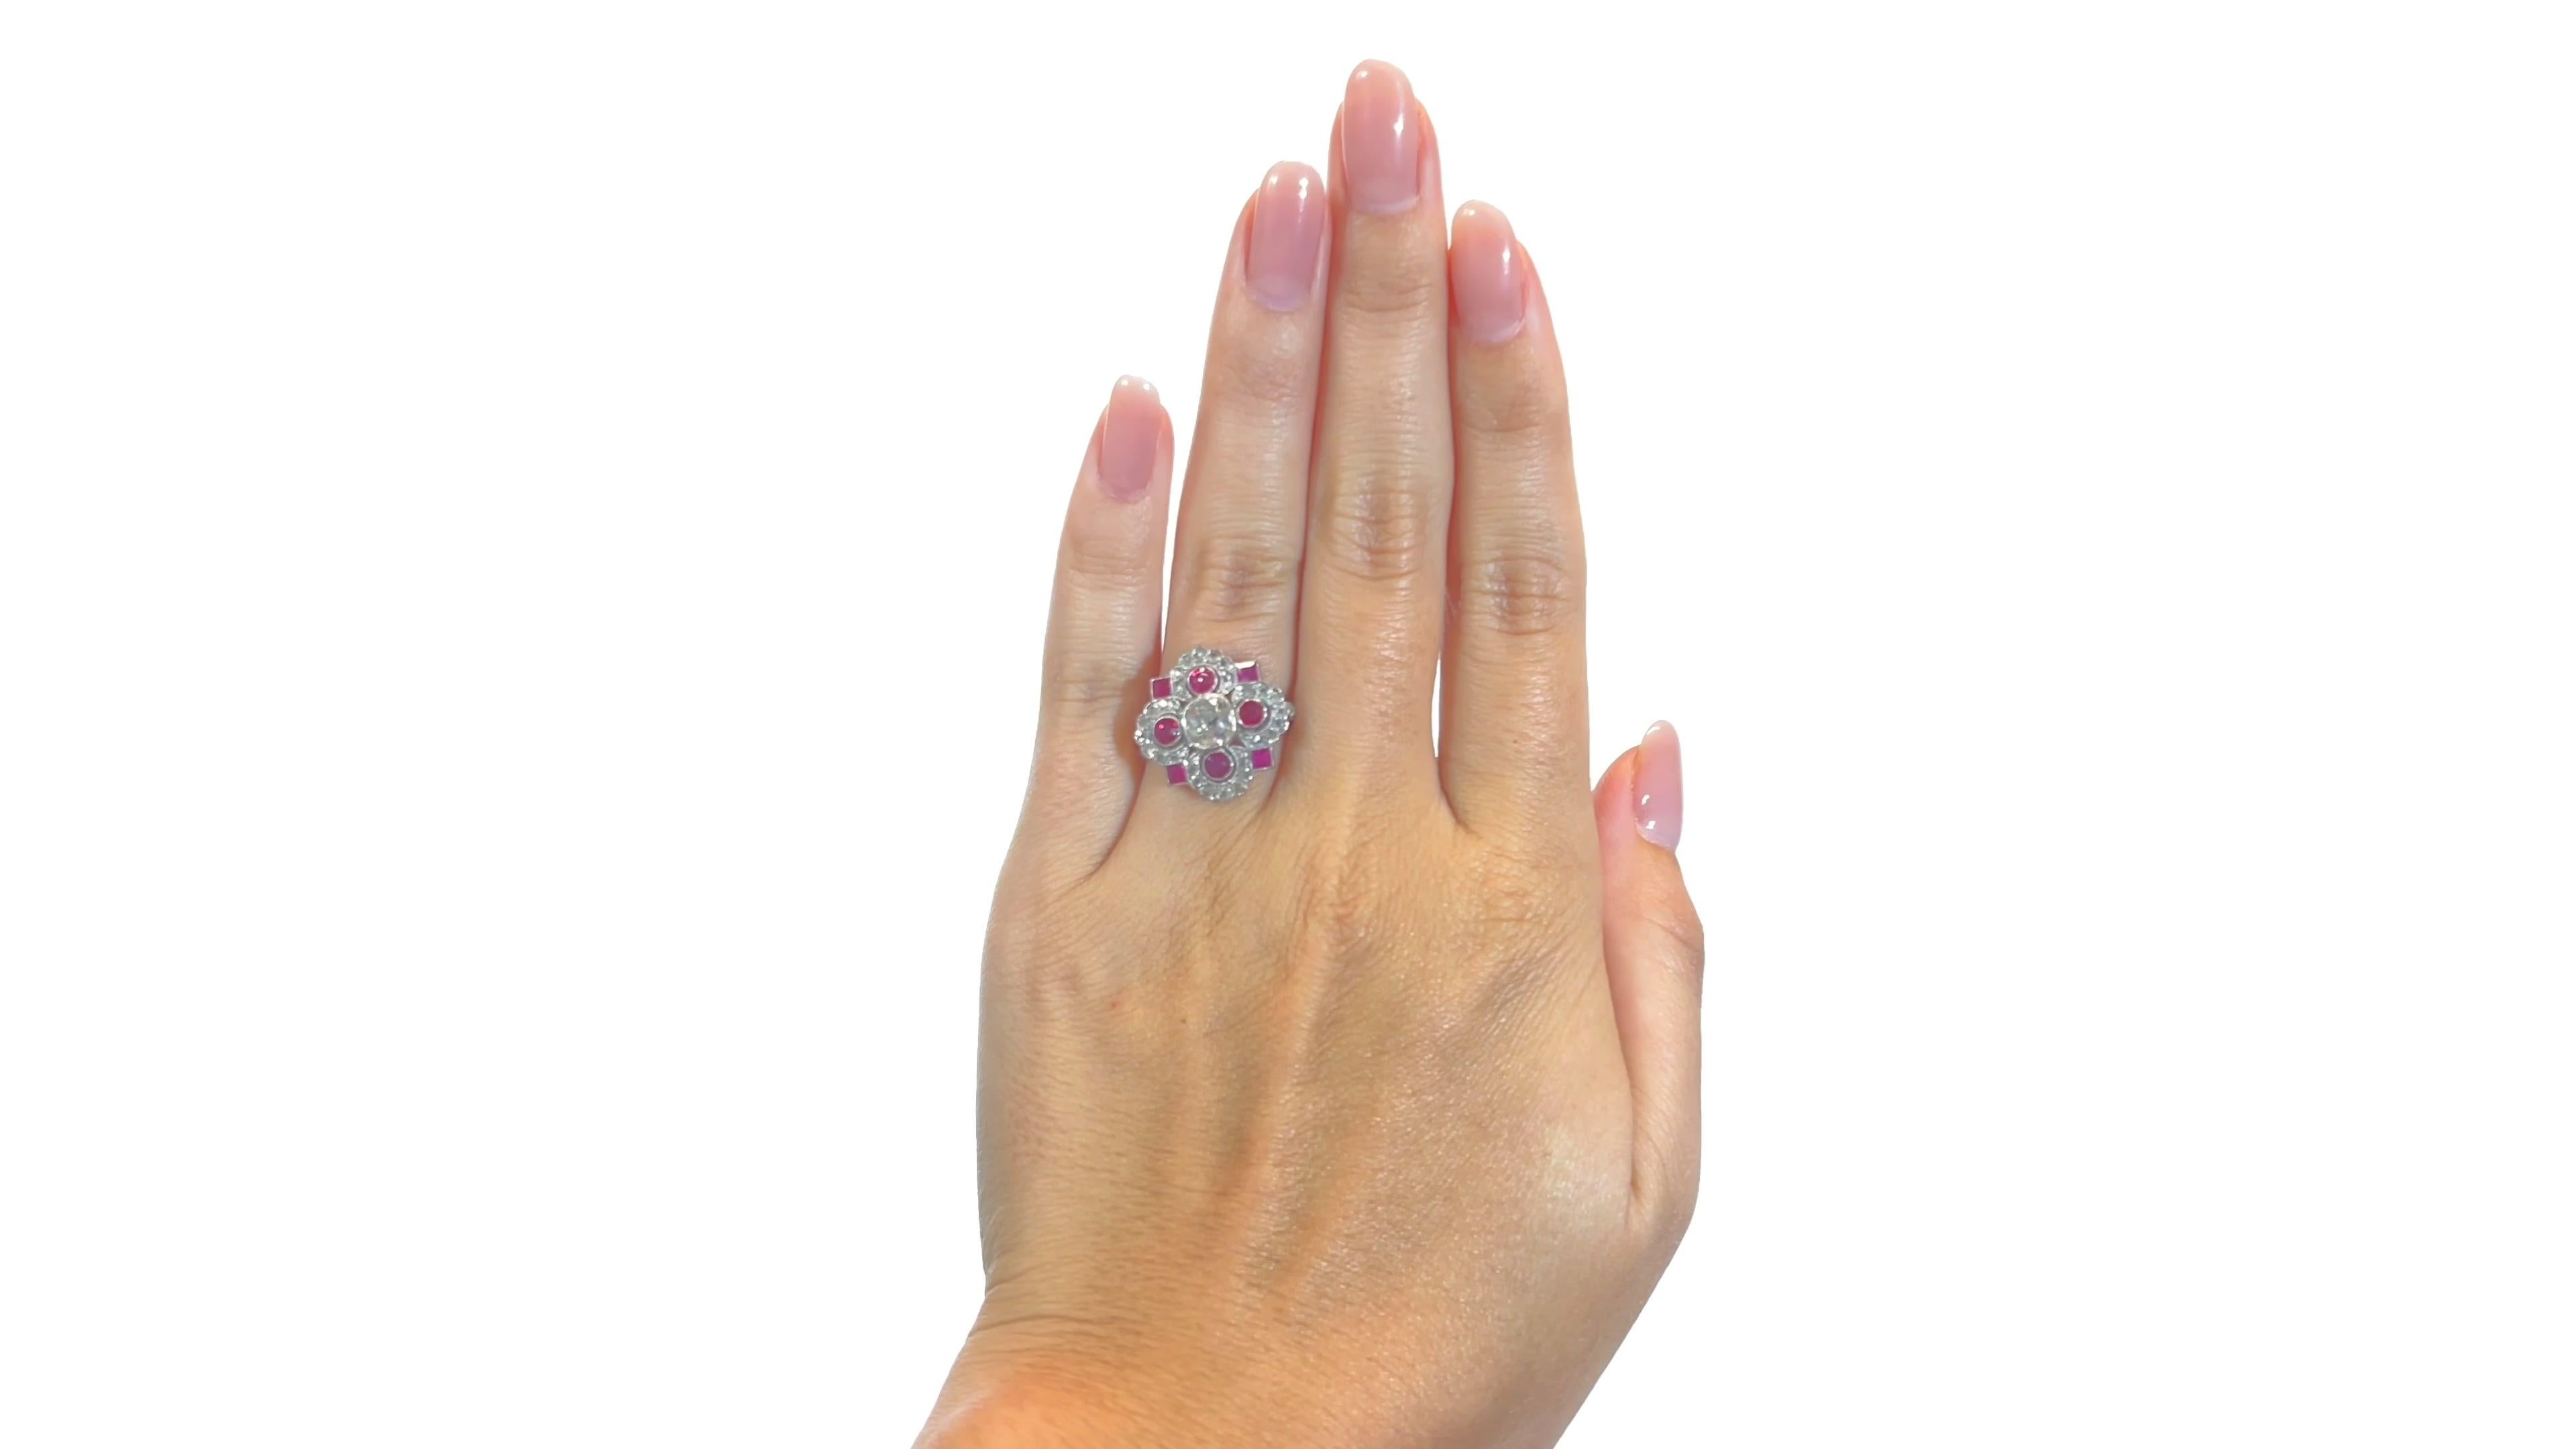 One Art Deco Diamond Ruby 18 Karat Yellow Gold Ring.  Featuring one old mine cut diamond weighing approximately 0.74 carat, graded G-H color, SI clarity. Accented by 28 rose cut diamonds with a total weight of approximately 0.70 carats, four round